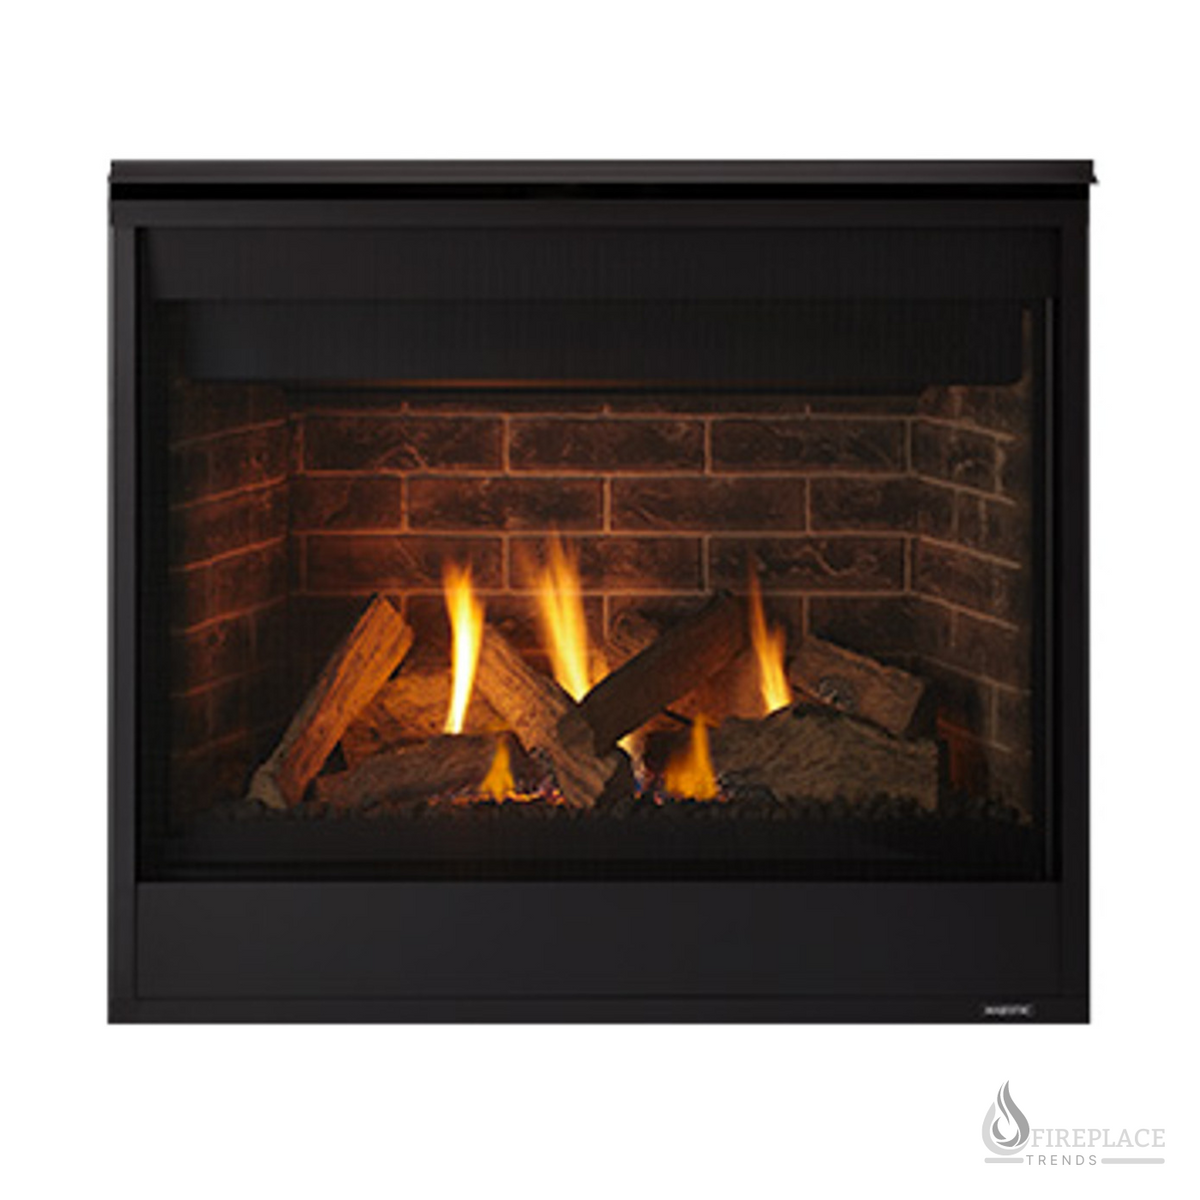 Majestic - Quartz 32" Direct Vent Traditional Gas Fireplace top-rear with IntelliFire Touch ignition